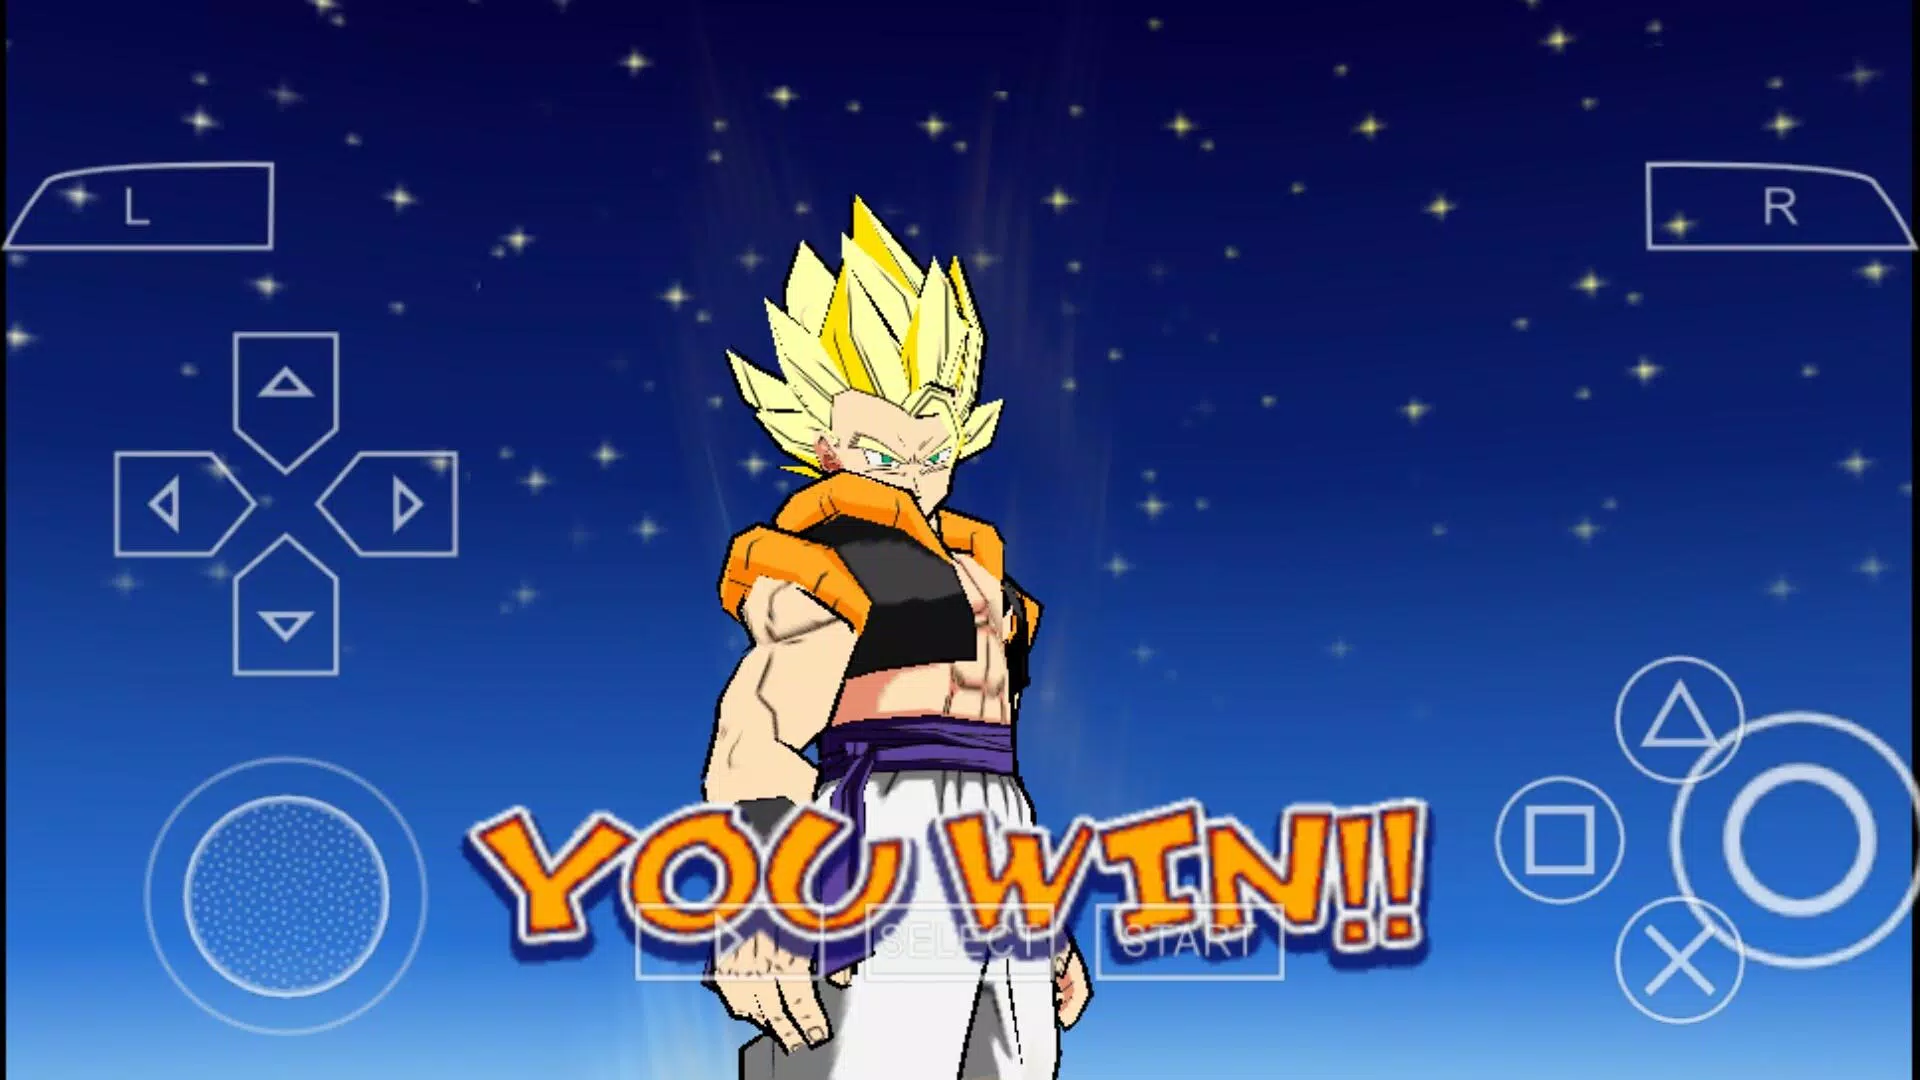 DRAGON BALL Z APK (Android Game) - Free Download